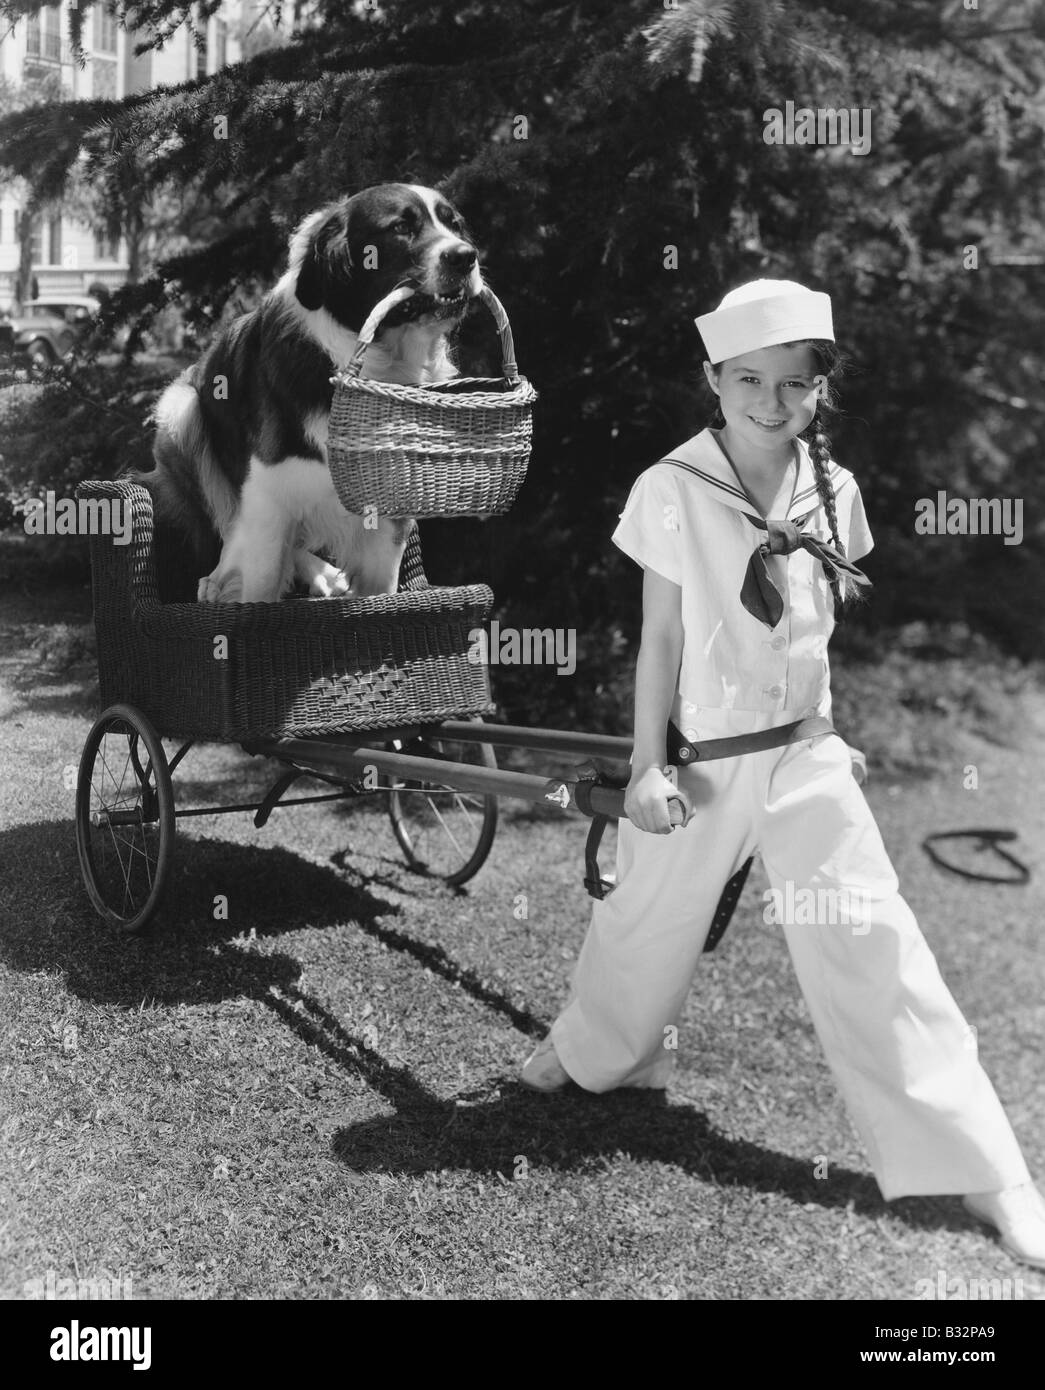 Girl in sailor suit pulling dog in basket Stock Photo